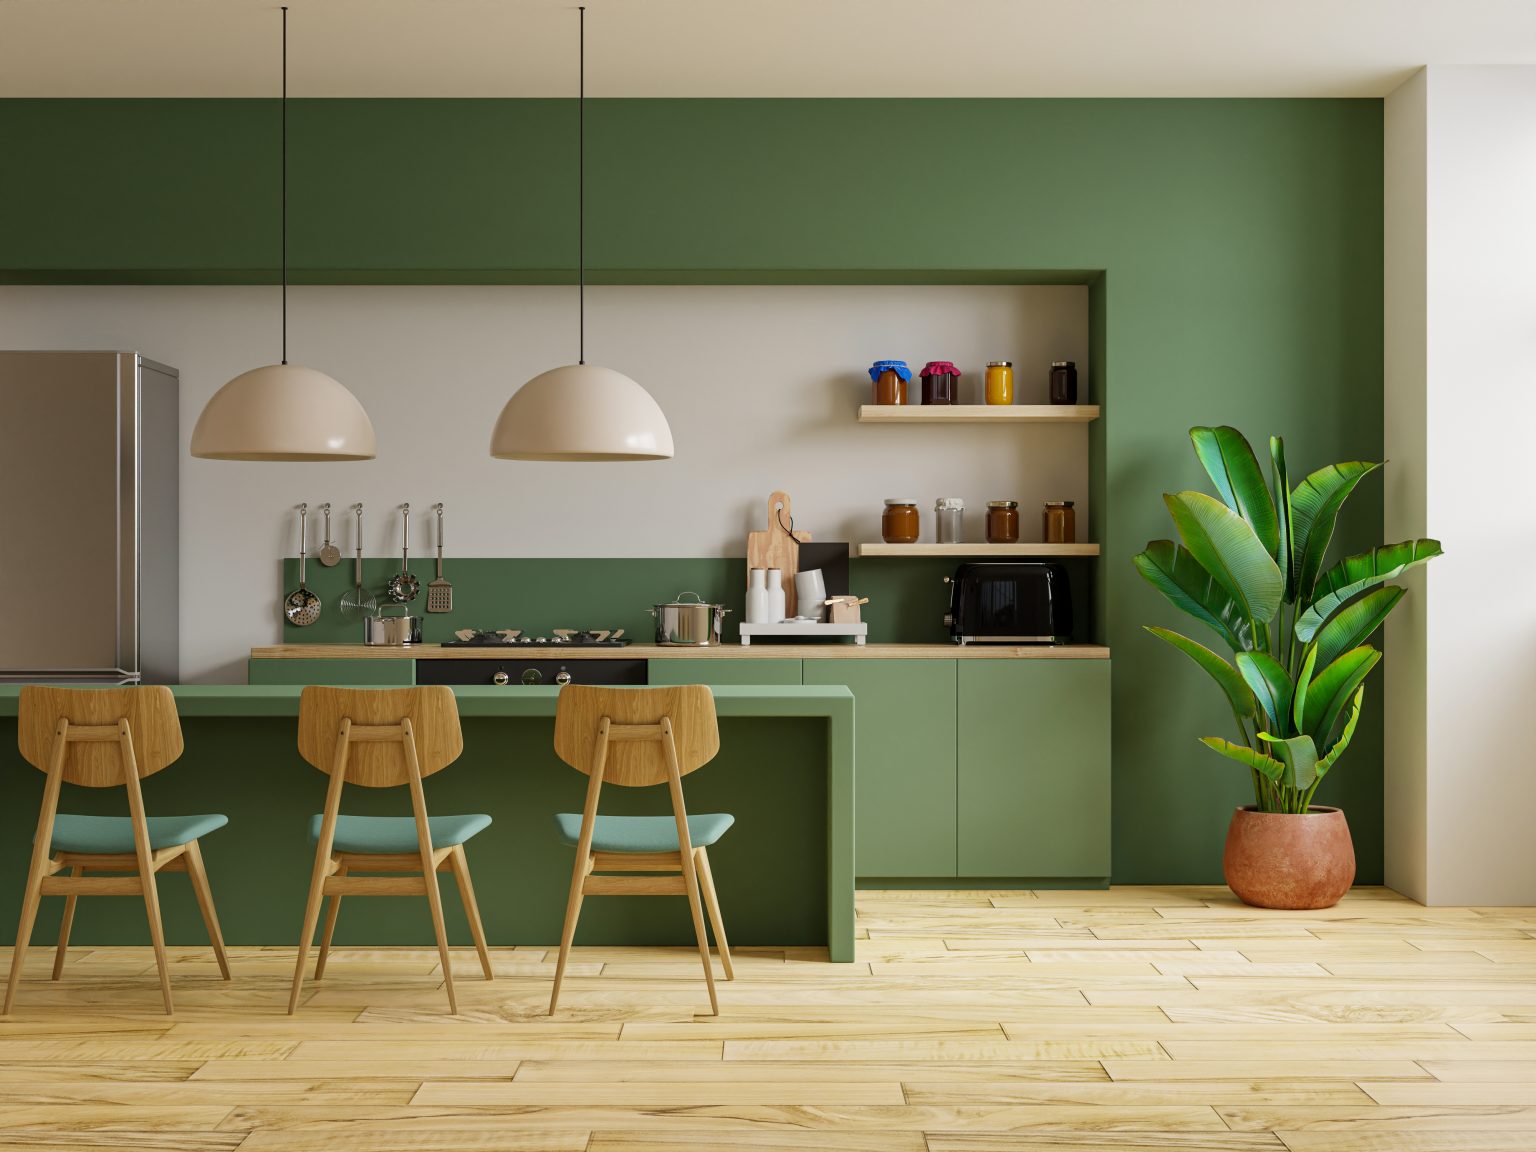 Modern Style Kitchen Interior Design With Green Wall 3d Rendering 1536x1152 